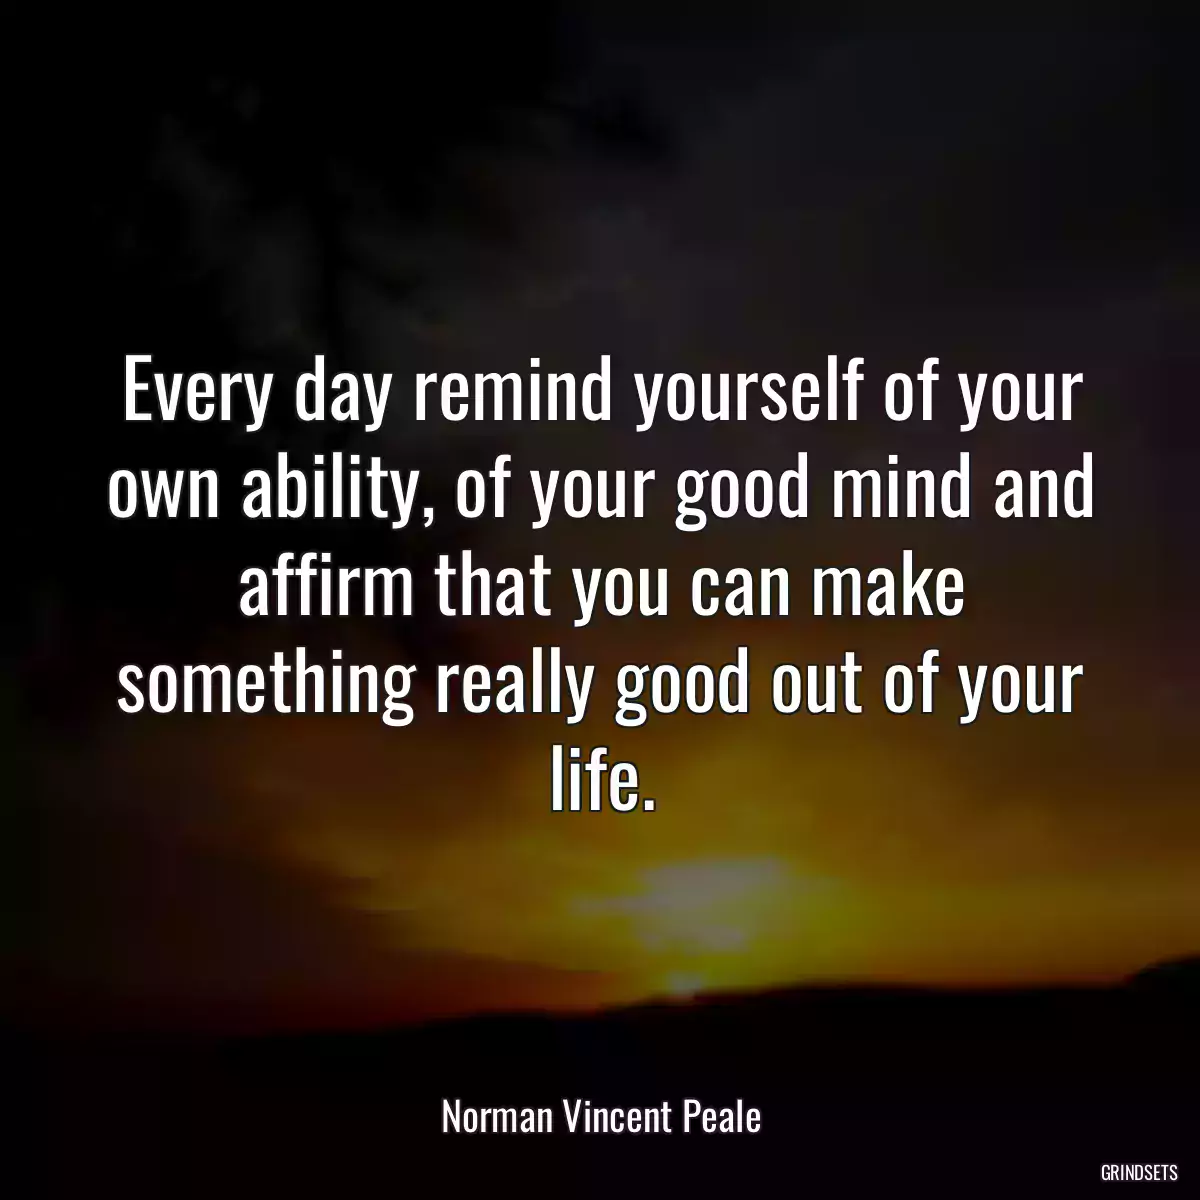 Every day remind yourself of your own ability, of your good mind and affirm that you can make something really good out of your life.